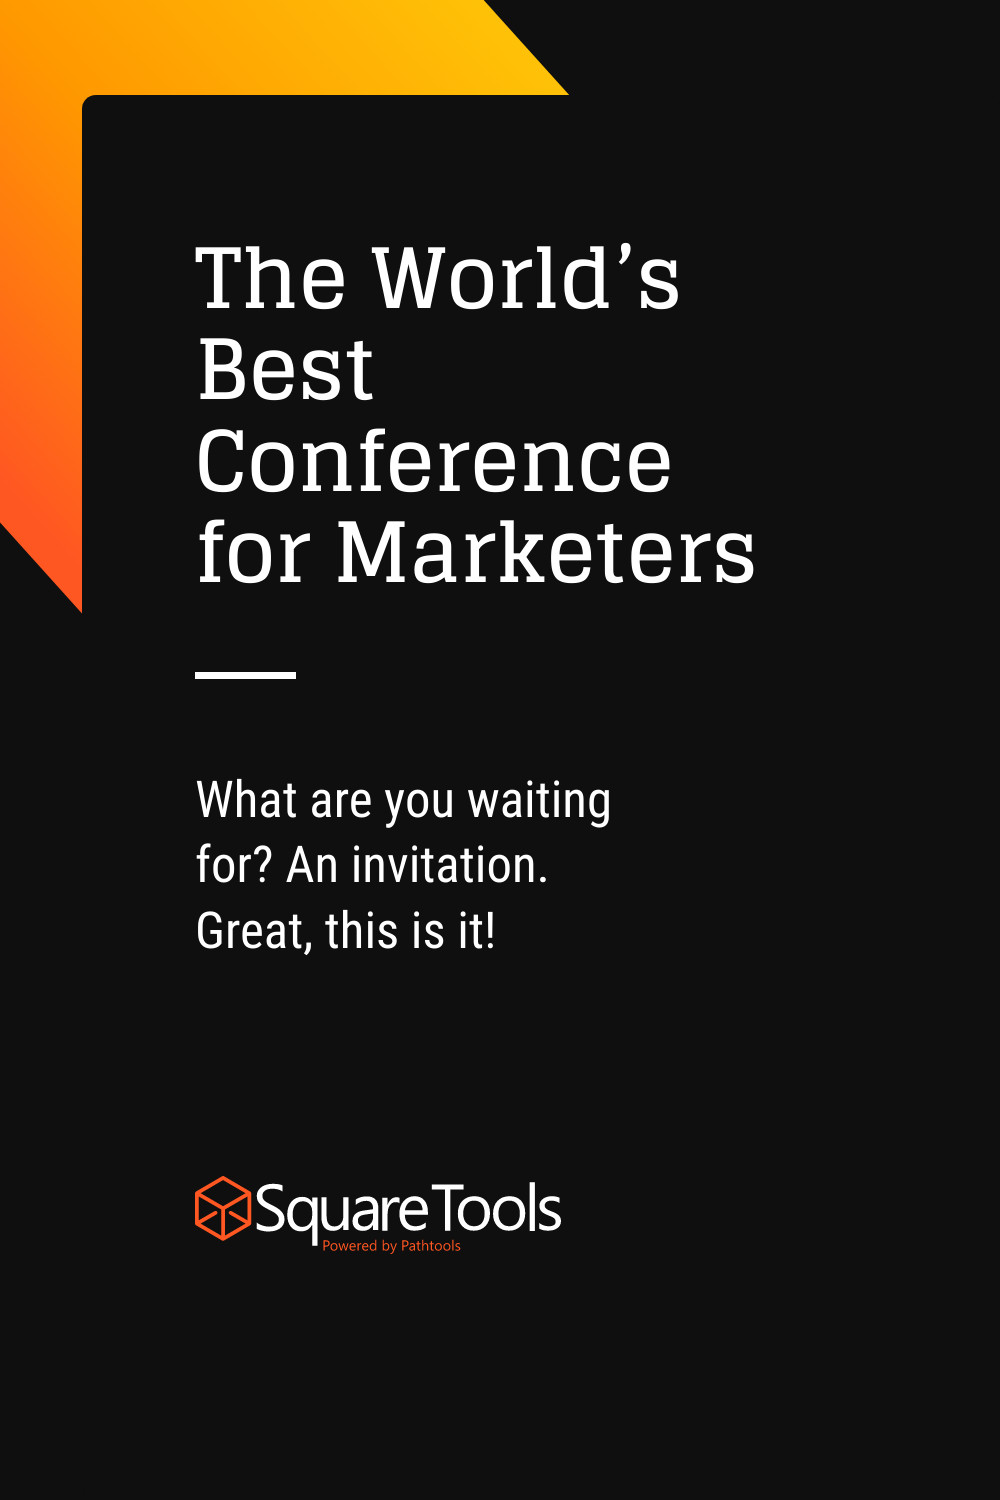 Best Conference for Marketers